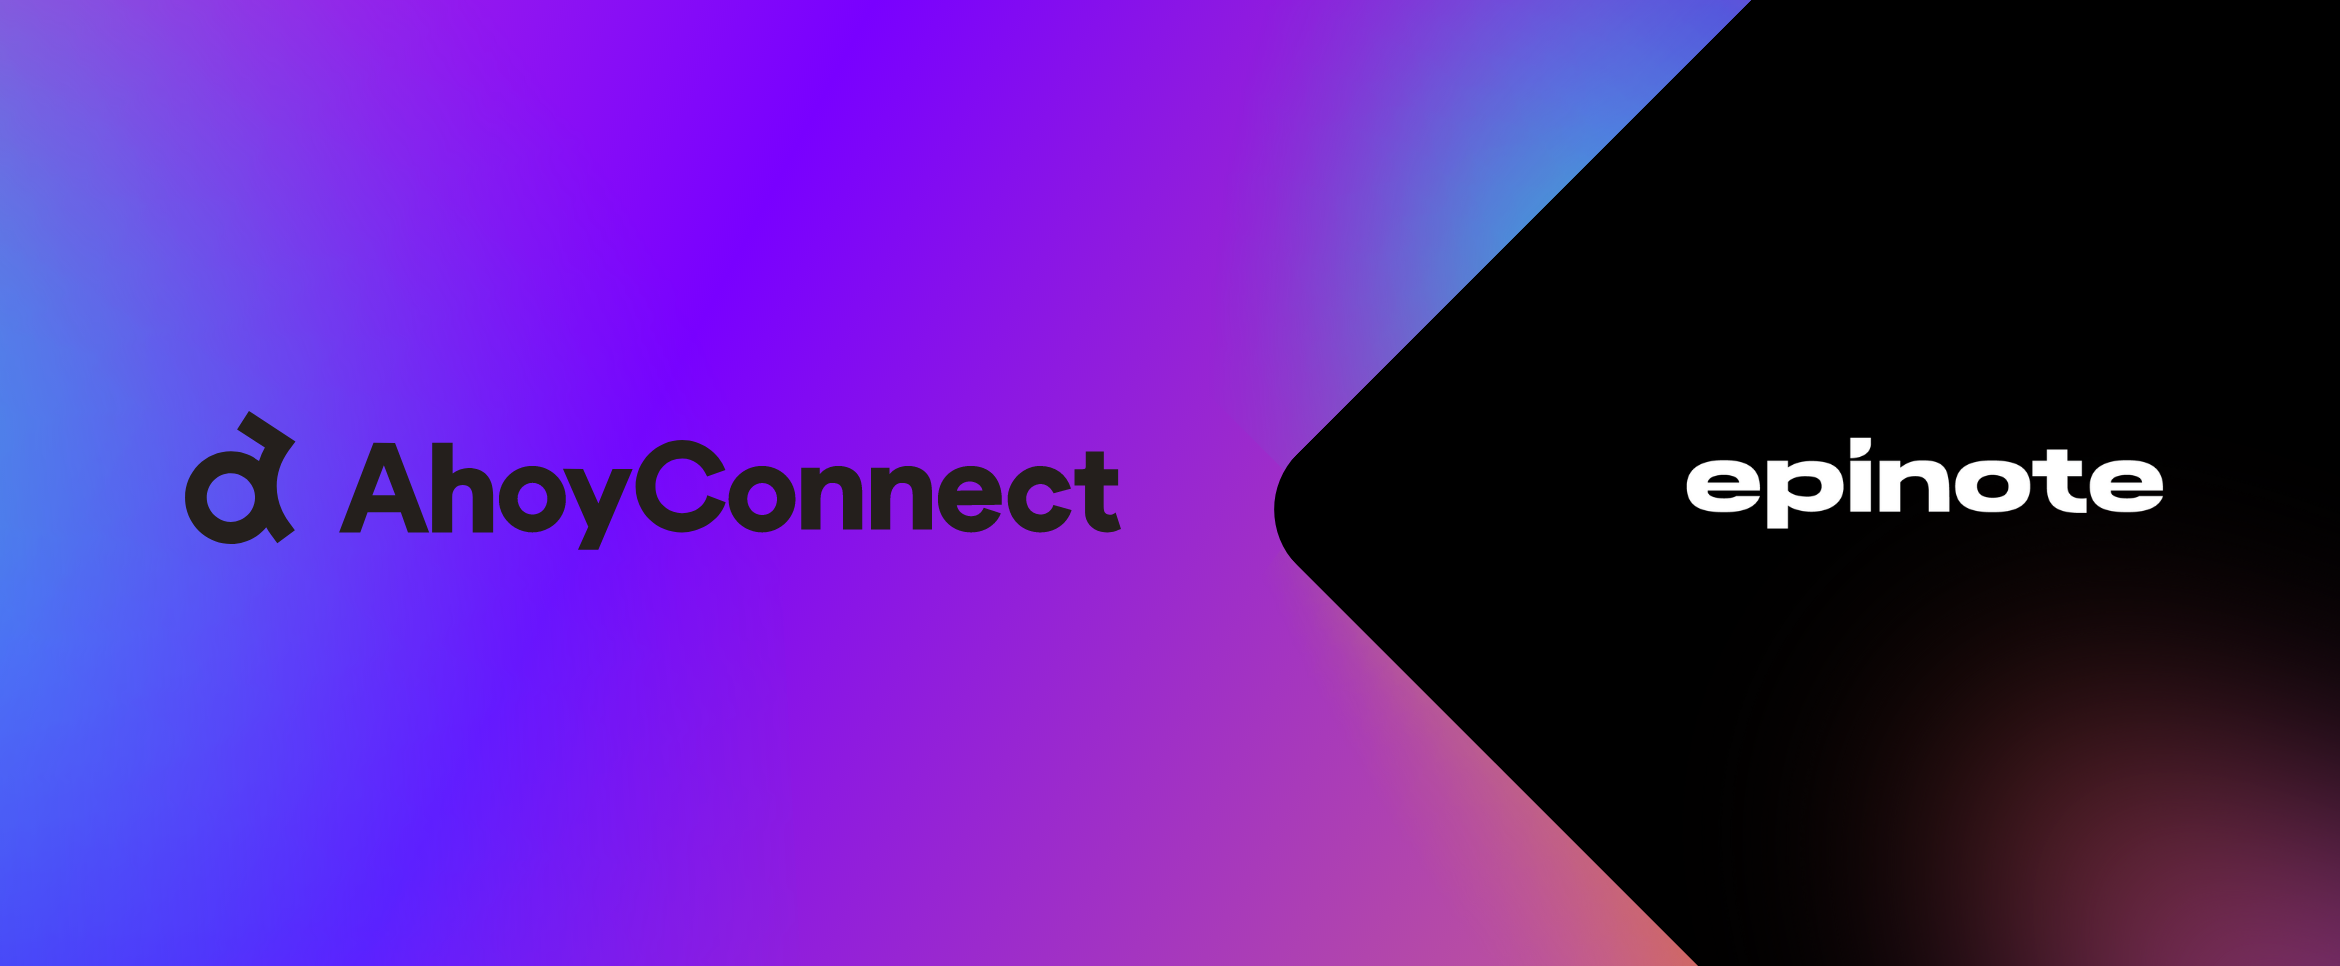 A futuristic banner showcasing AhoyConnect and epinote logotypes. The AhoyConnect logotype is located on the left, it's black and put on a gradient background in blue, pink and purple. The epinote logotype is white and located on the right and put on a black background.